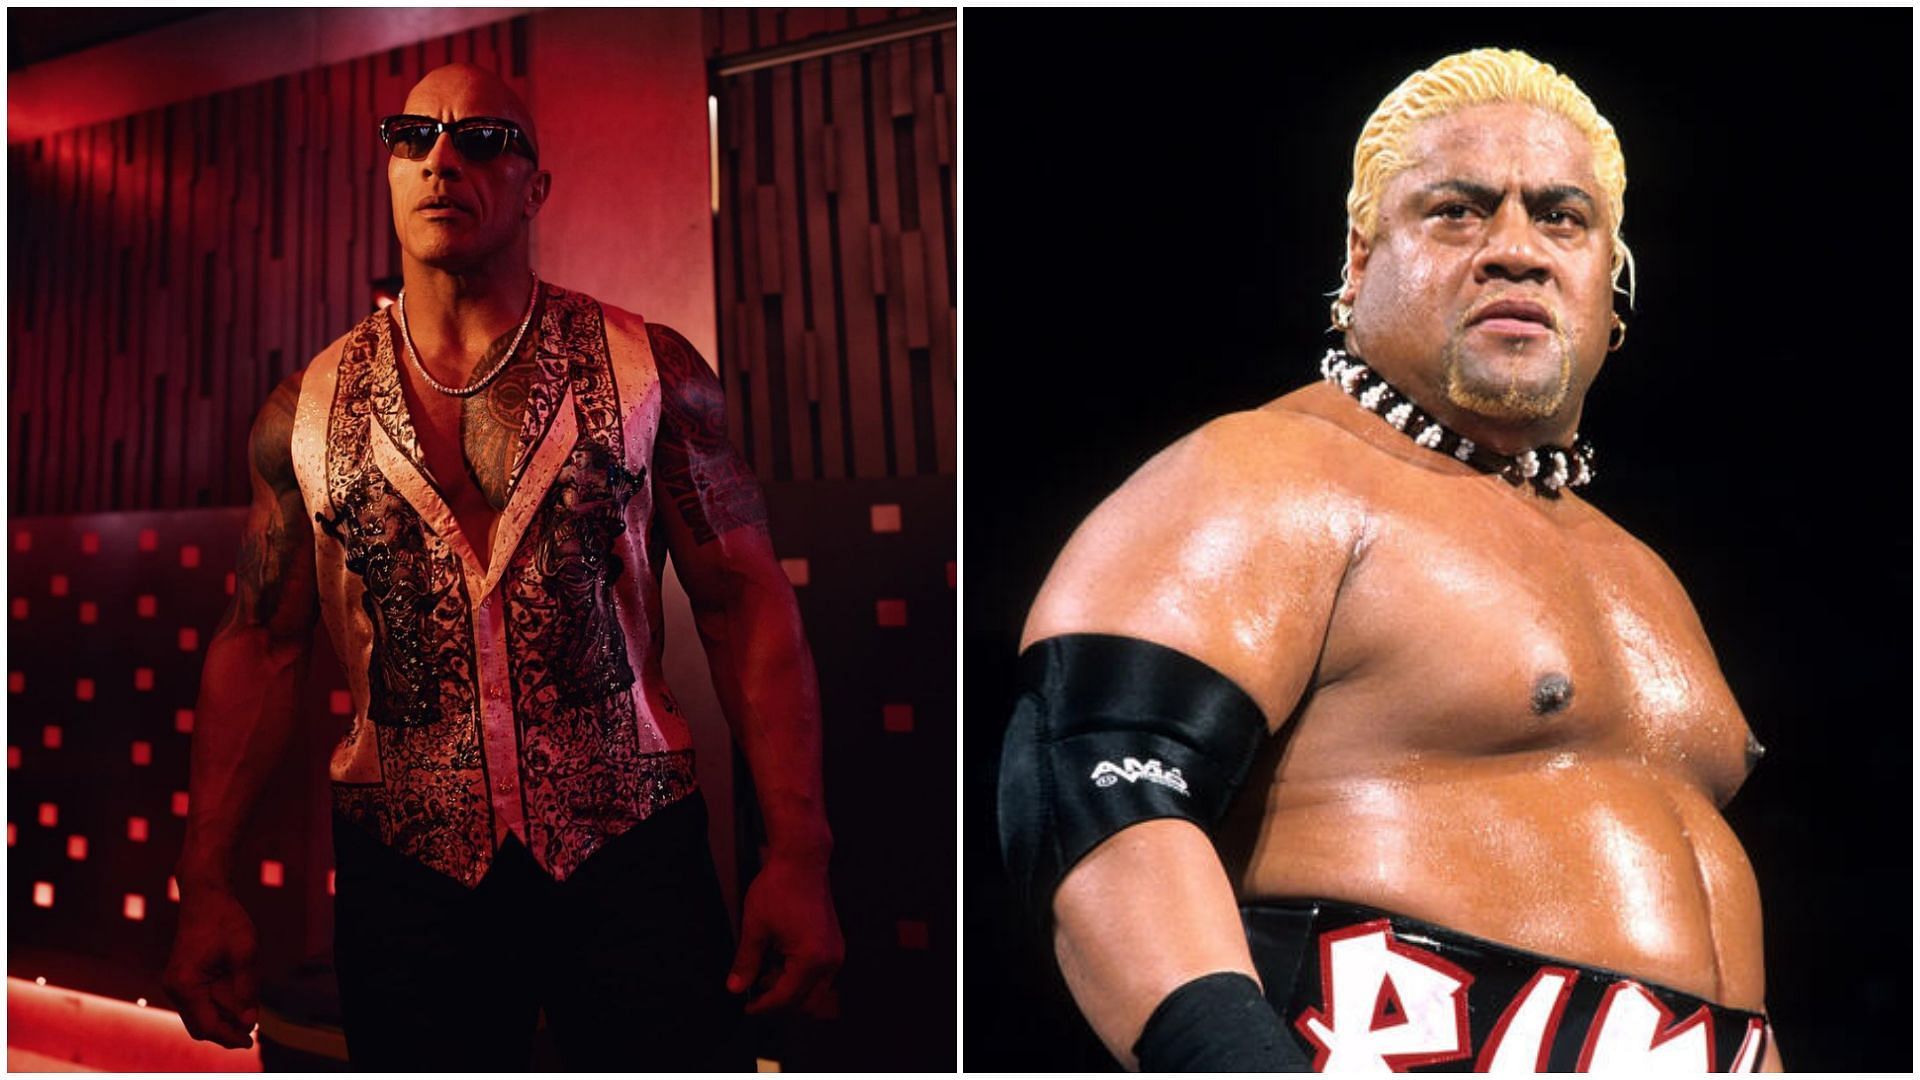 The Rock (left), and Rikishi (right)